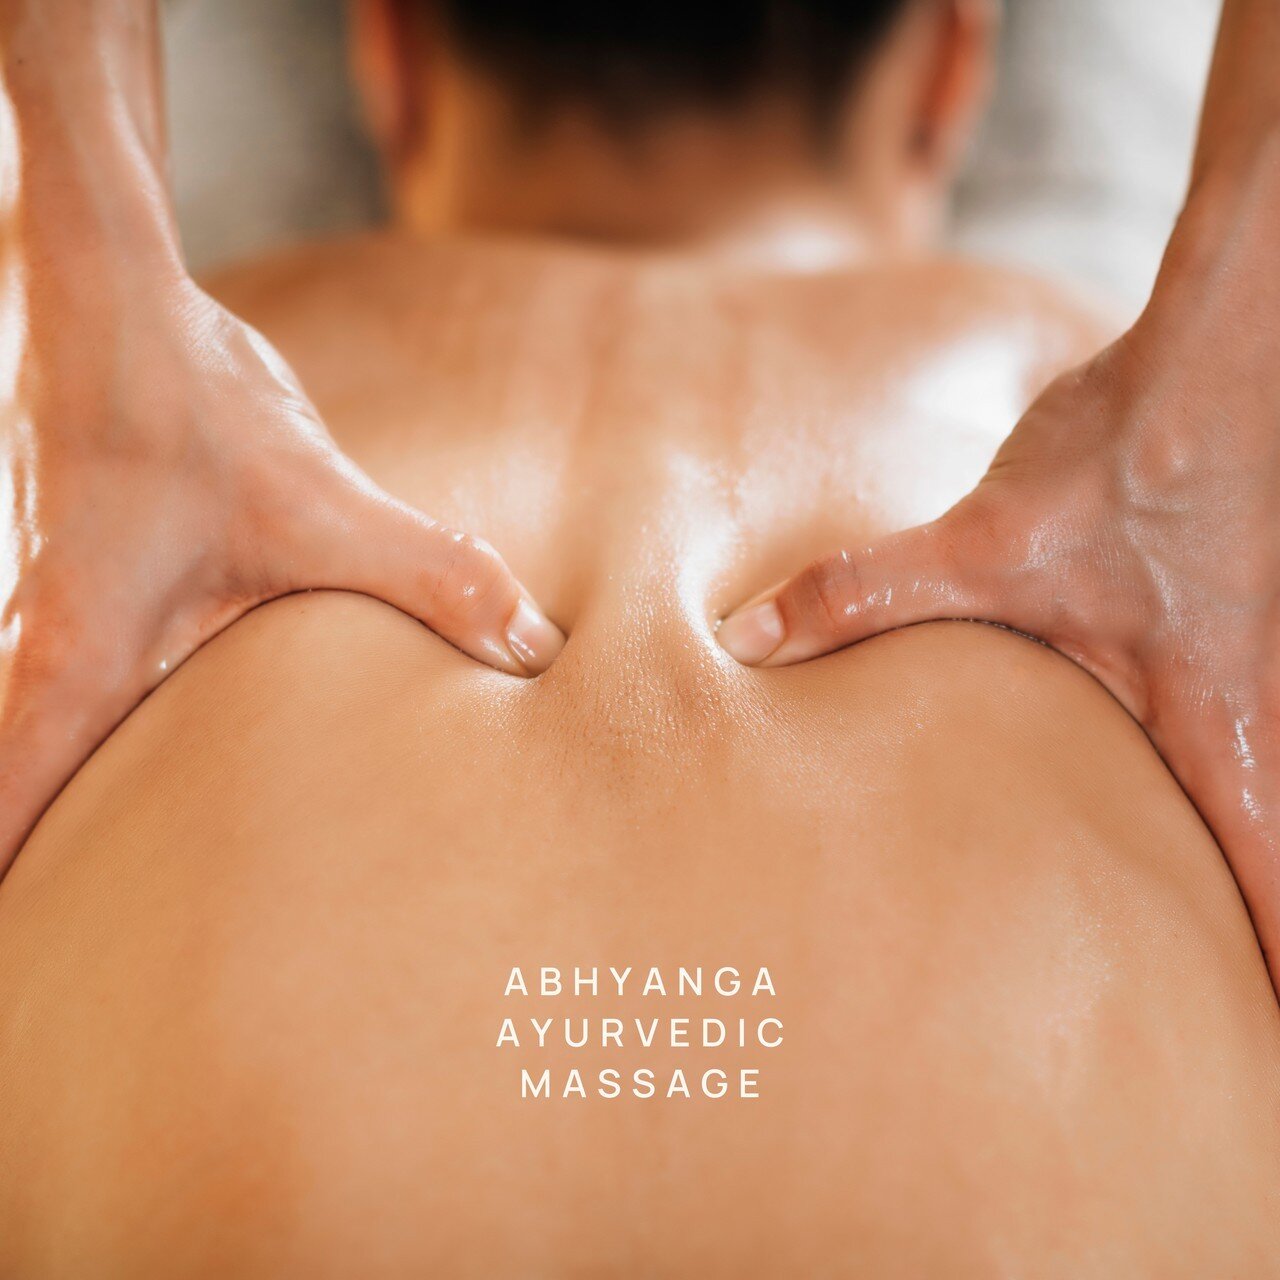 What is Abhyanga? Abhyanga is a Sanskrit term meaning &quot;massaging the body's limbs&quot; or &quot;glowing body.&quot; It is derived from abhi, meaning &quot;into&quot; or &quot;glow,&quot; and anga meaning &quot;limb.&quot; Abhyanga is a form of 